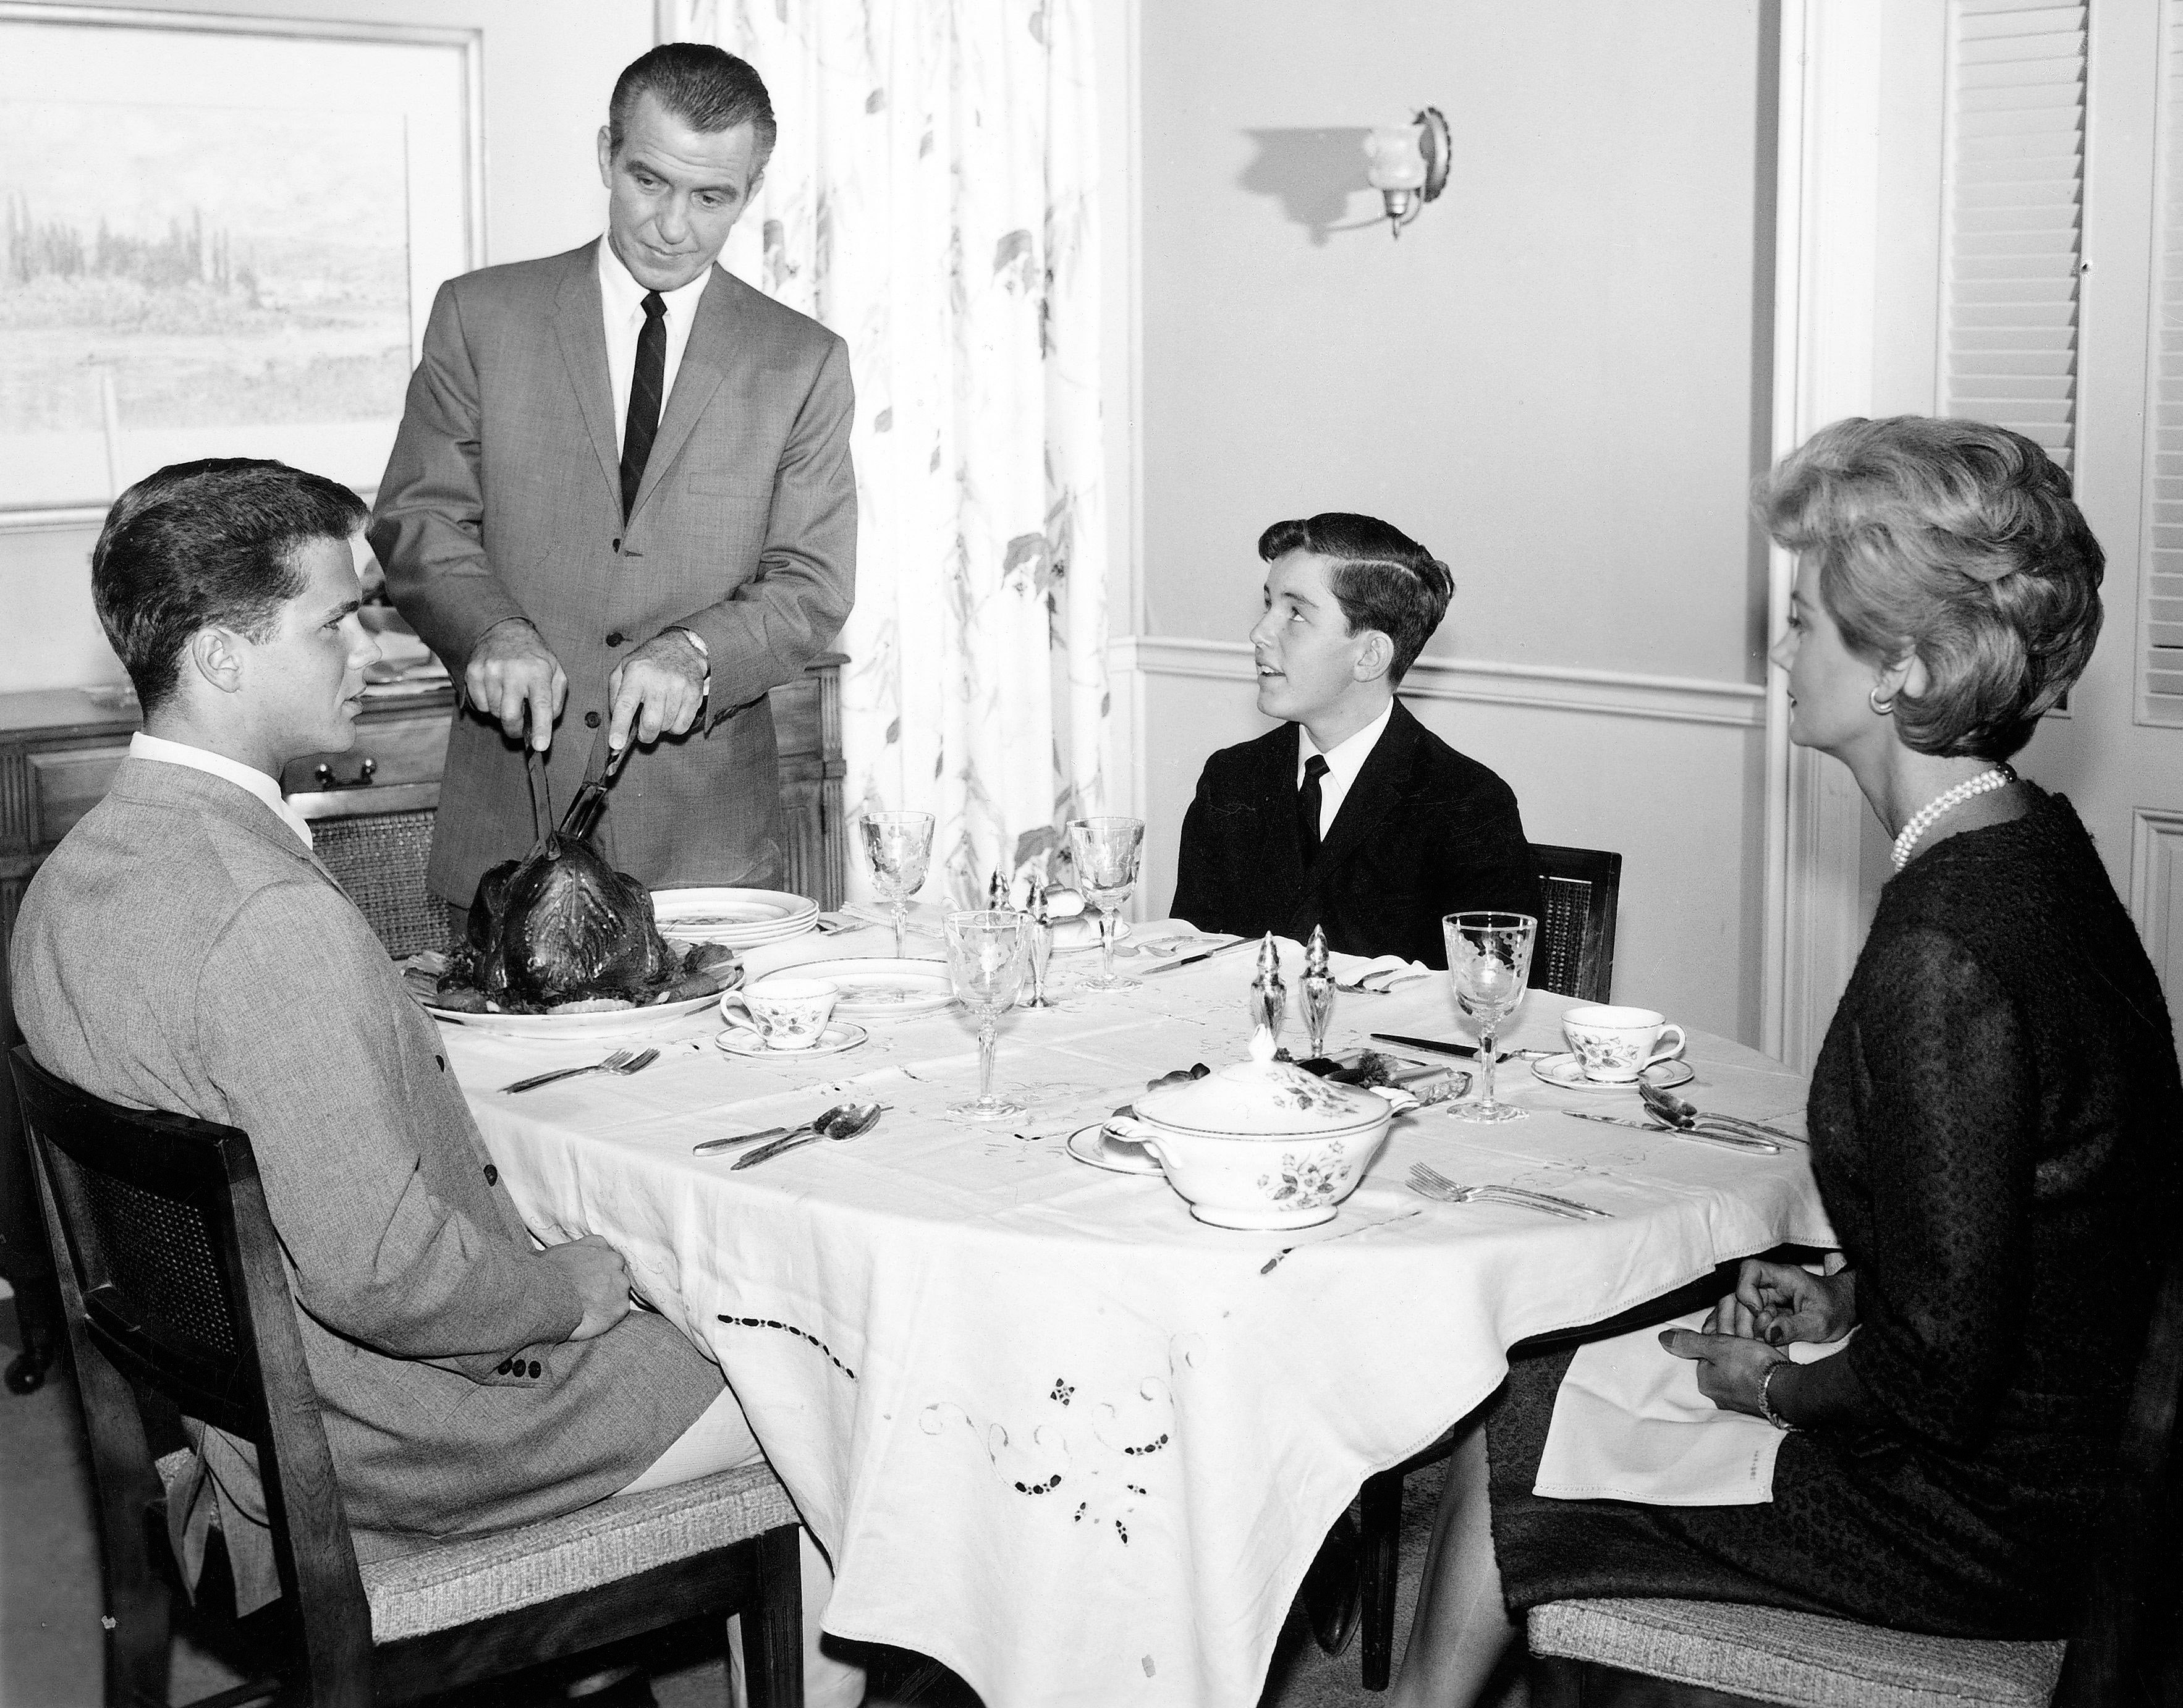 The cast of 'Leave It to Beaver' in a dinnertime scene. Seen are, clockwise, Hugh Beaumont (standing) as Ward Cleaver, Jerry Mathers as Beaver Cleaver, Barbara Billingsley as June Cleaver, and Tony Dow as Wally Cleaver